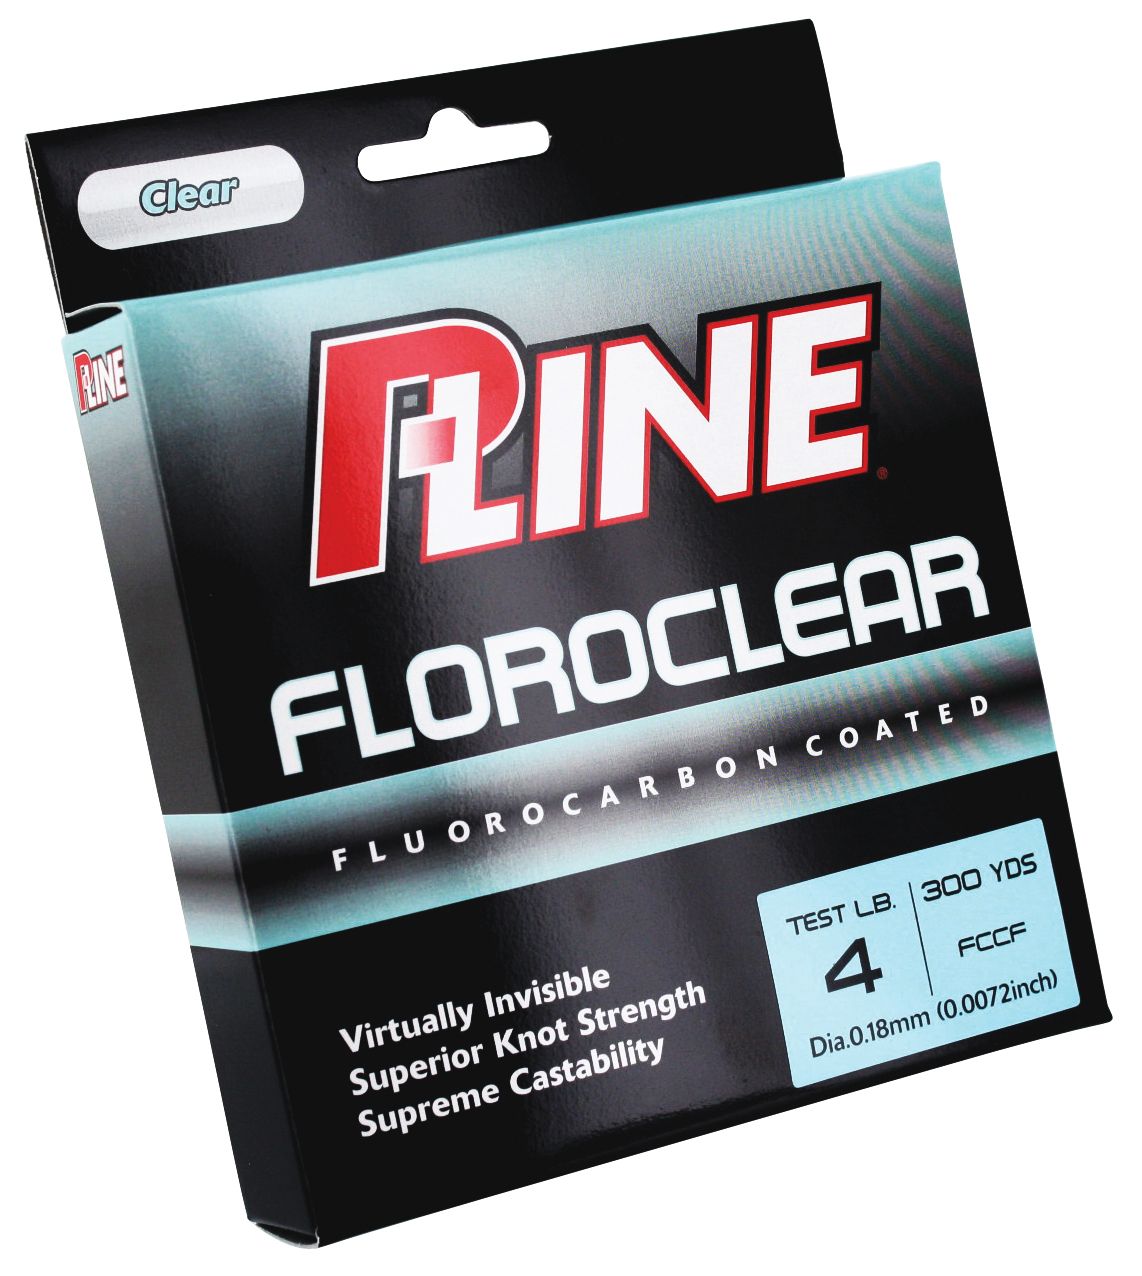 Dick's Sporting Goods P-Line Floroclear Fluorocarbon Coated